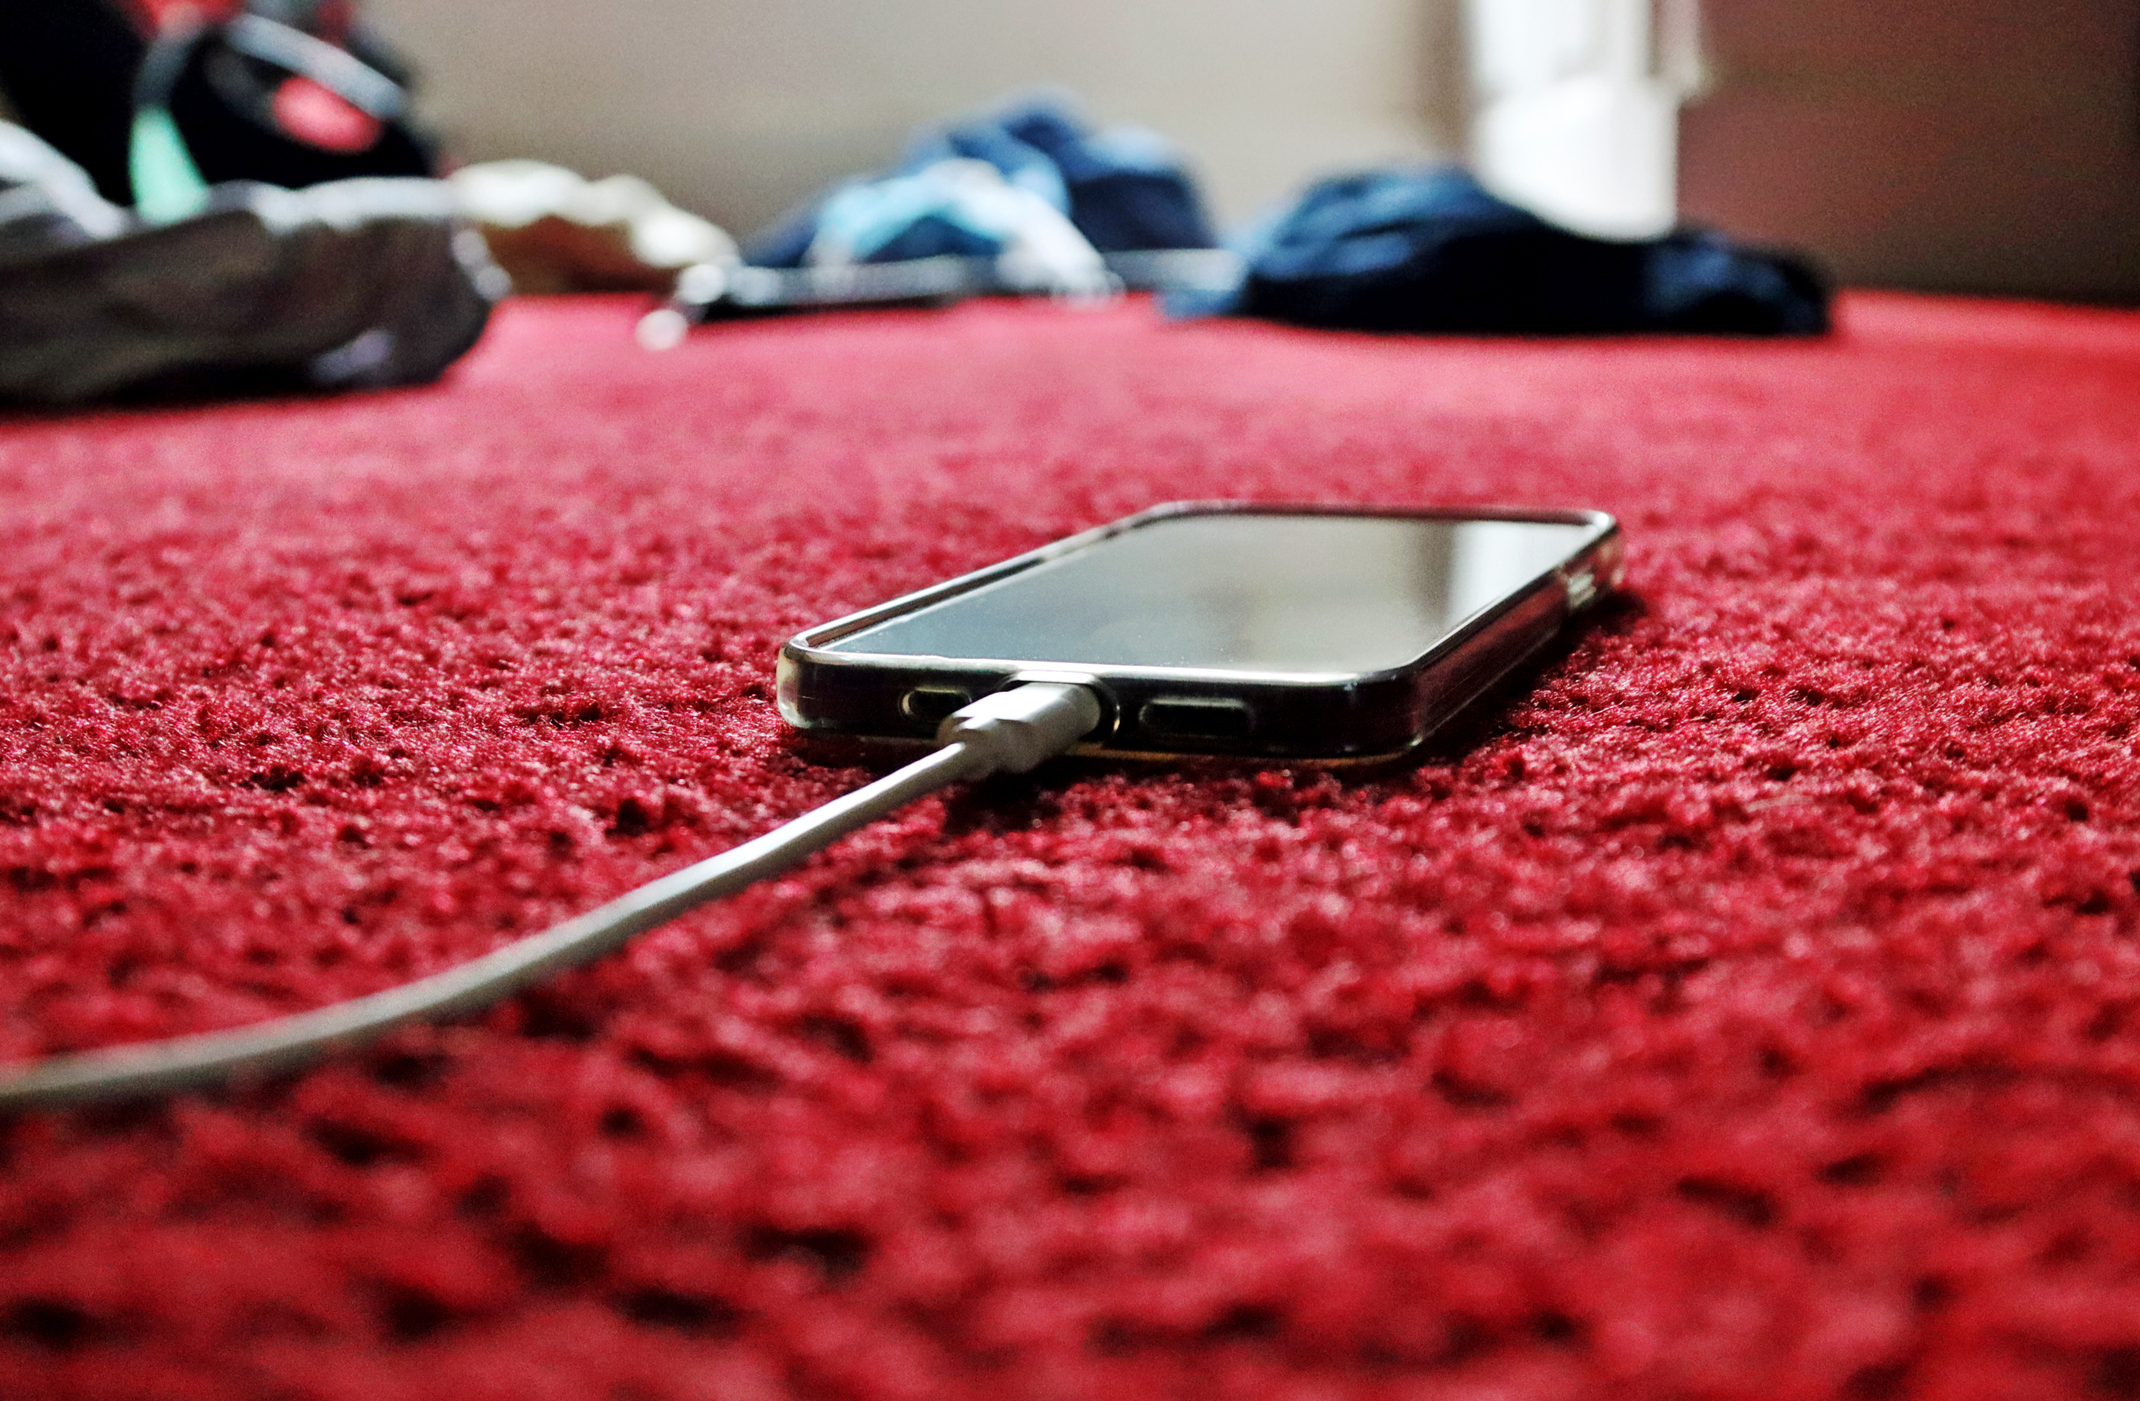 Smartphone charging on a red carpet with clothing items in the background